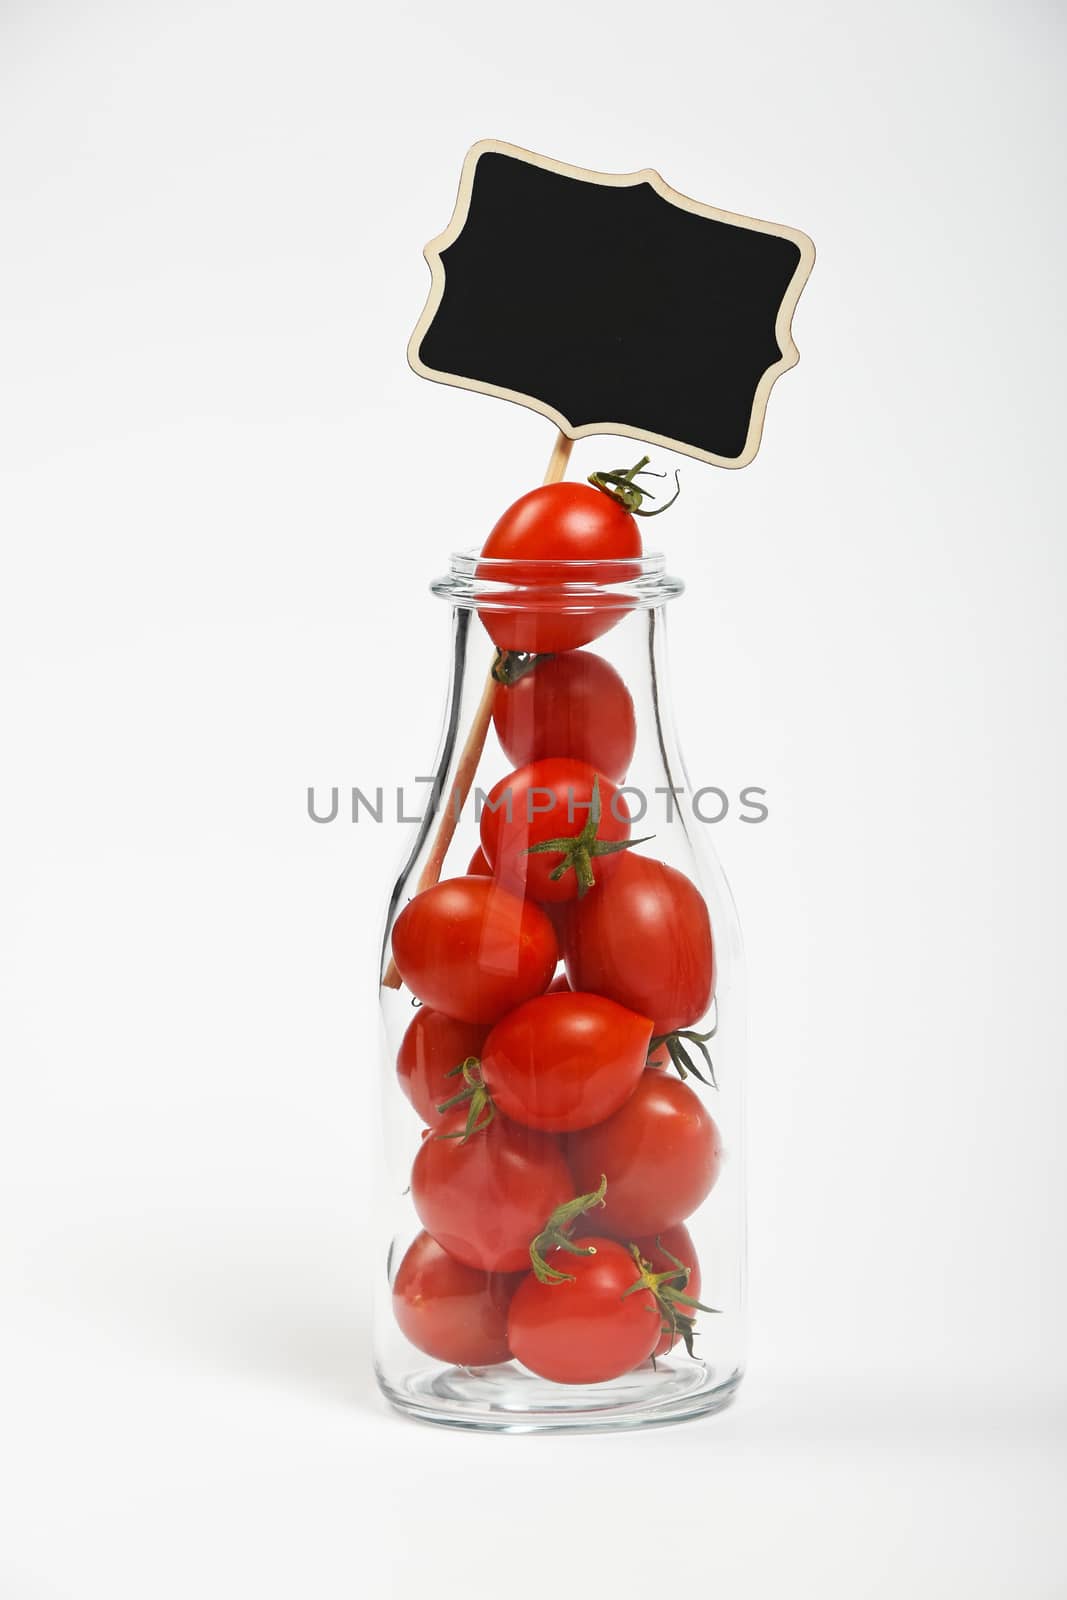 Big glass bottle full of cherry tomatoes and black chalkboard sign over white background as symbol of fresh natural organic juice or ketchup